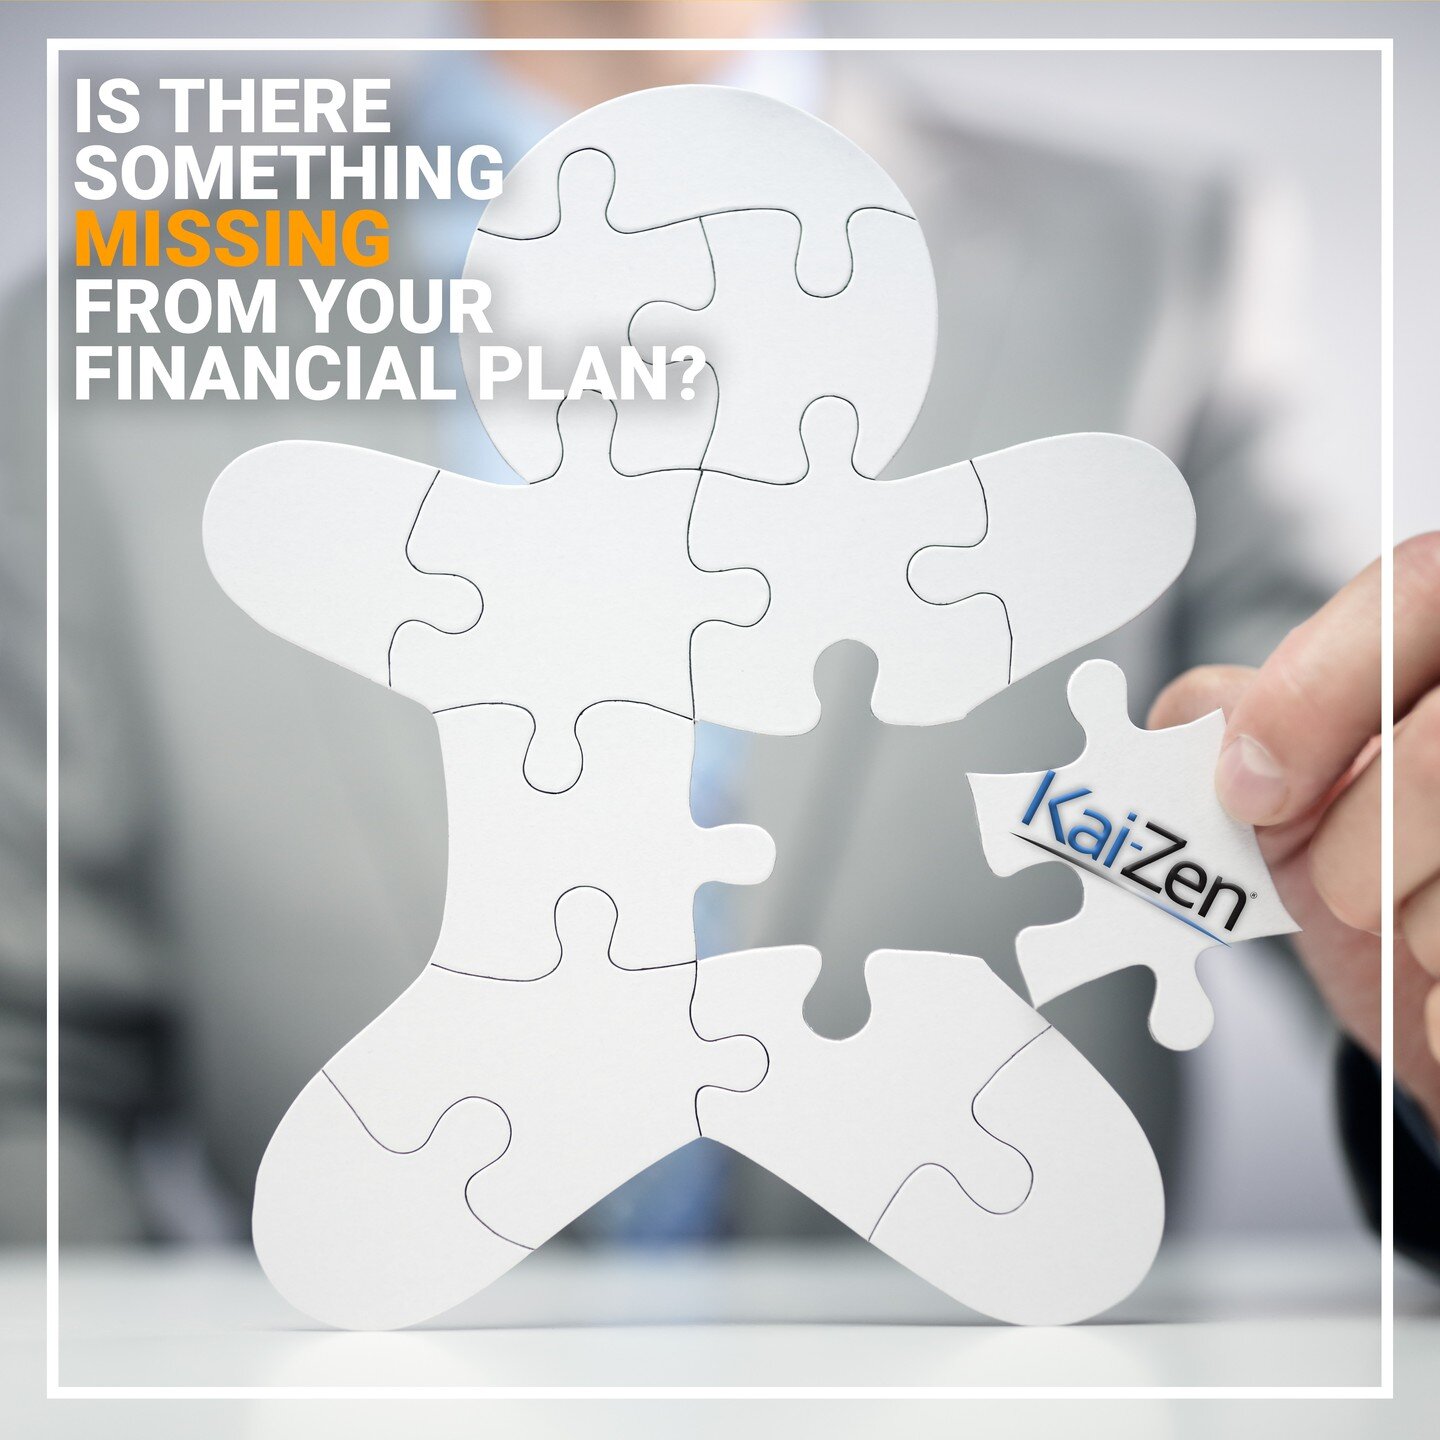 Are you struggling to find the missing piece to your financial plan? Let Kai-Zen help you put it all together!

#retirement #retirementplanning #financialfreedom #investment #insurance #money #financialplanning #investing #lifeinsurance #realestate #